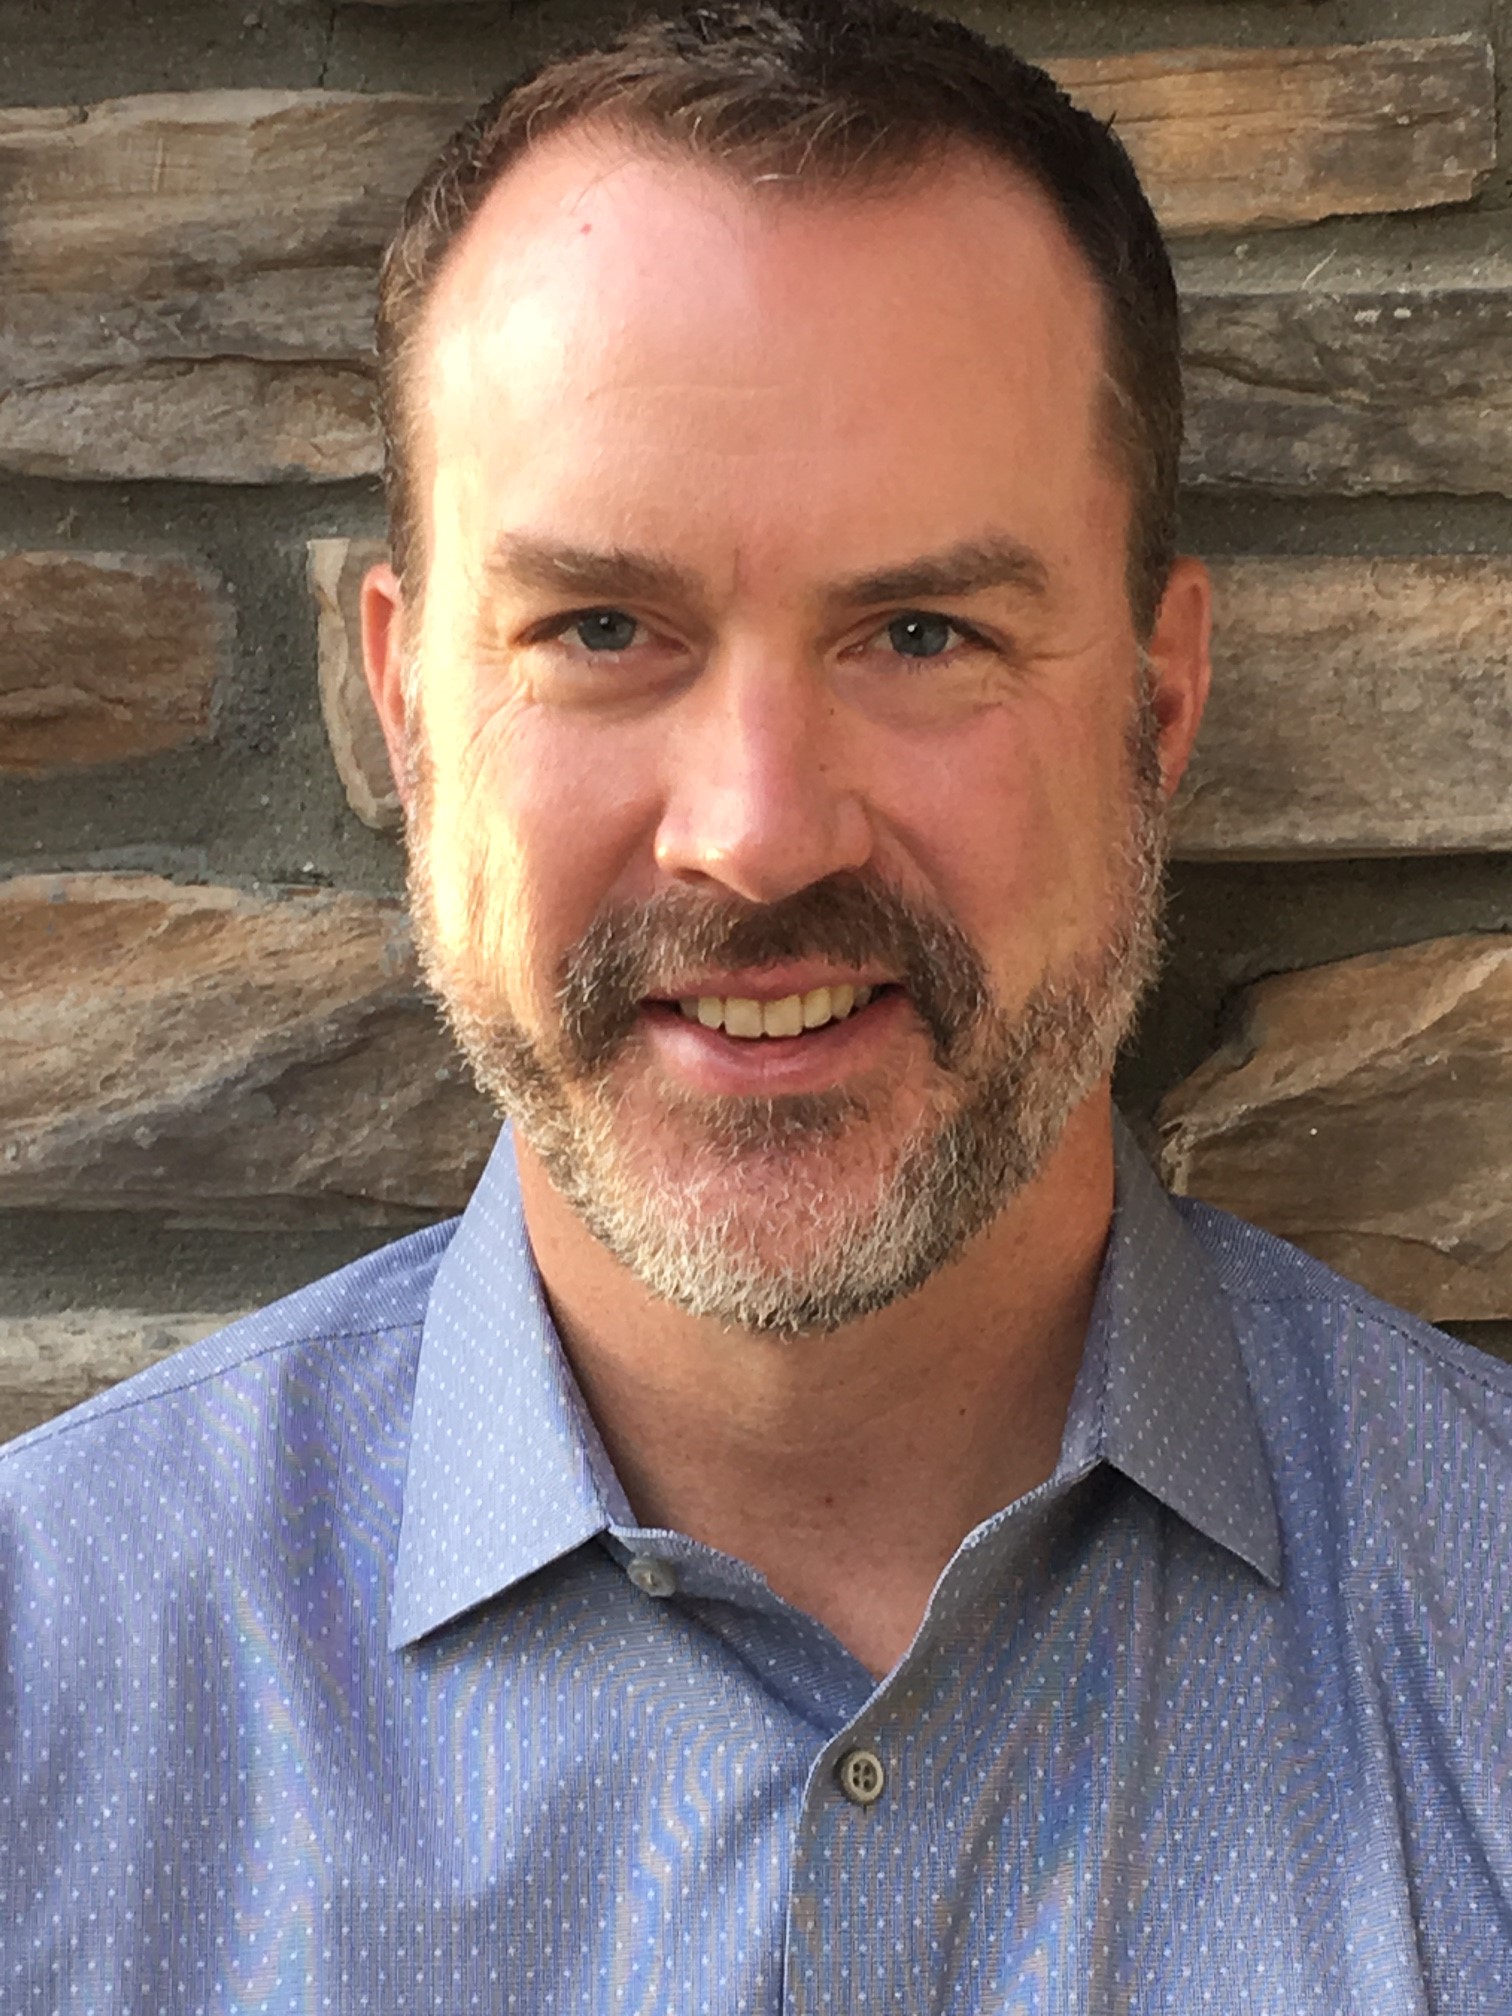 Mike Murray joins the Good Karma Foods team as CEO with more than 25 years of CPG experience. Murray will help the company gain distribution, launch new innovation and actively engage consumers.